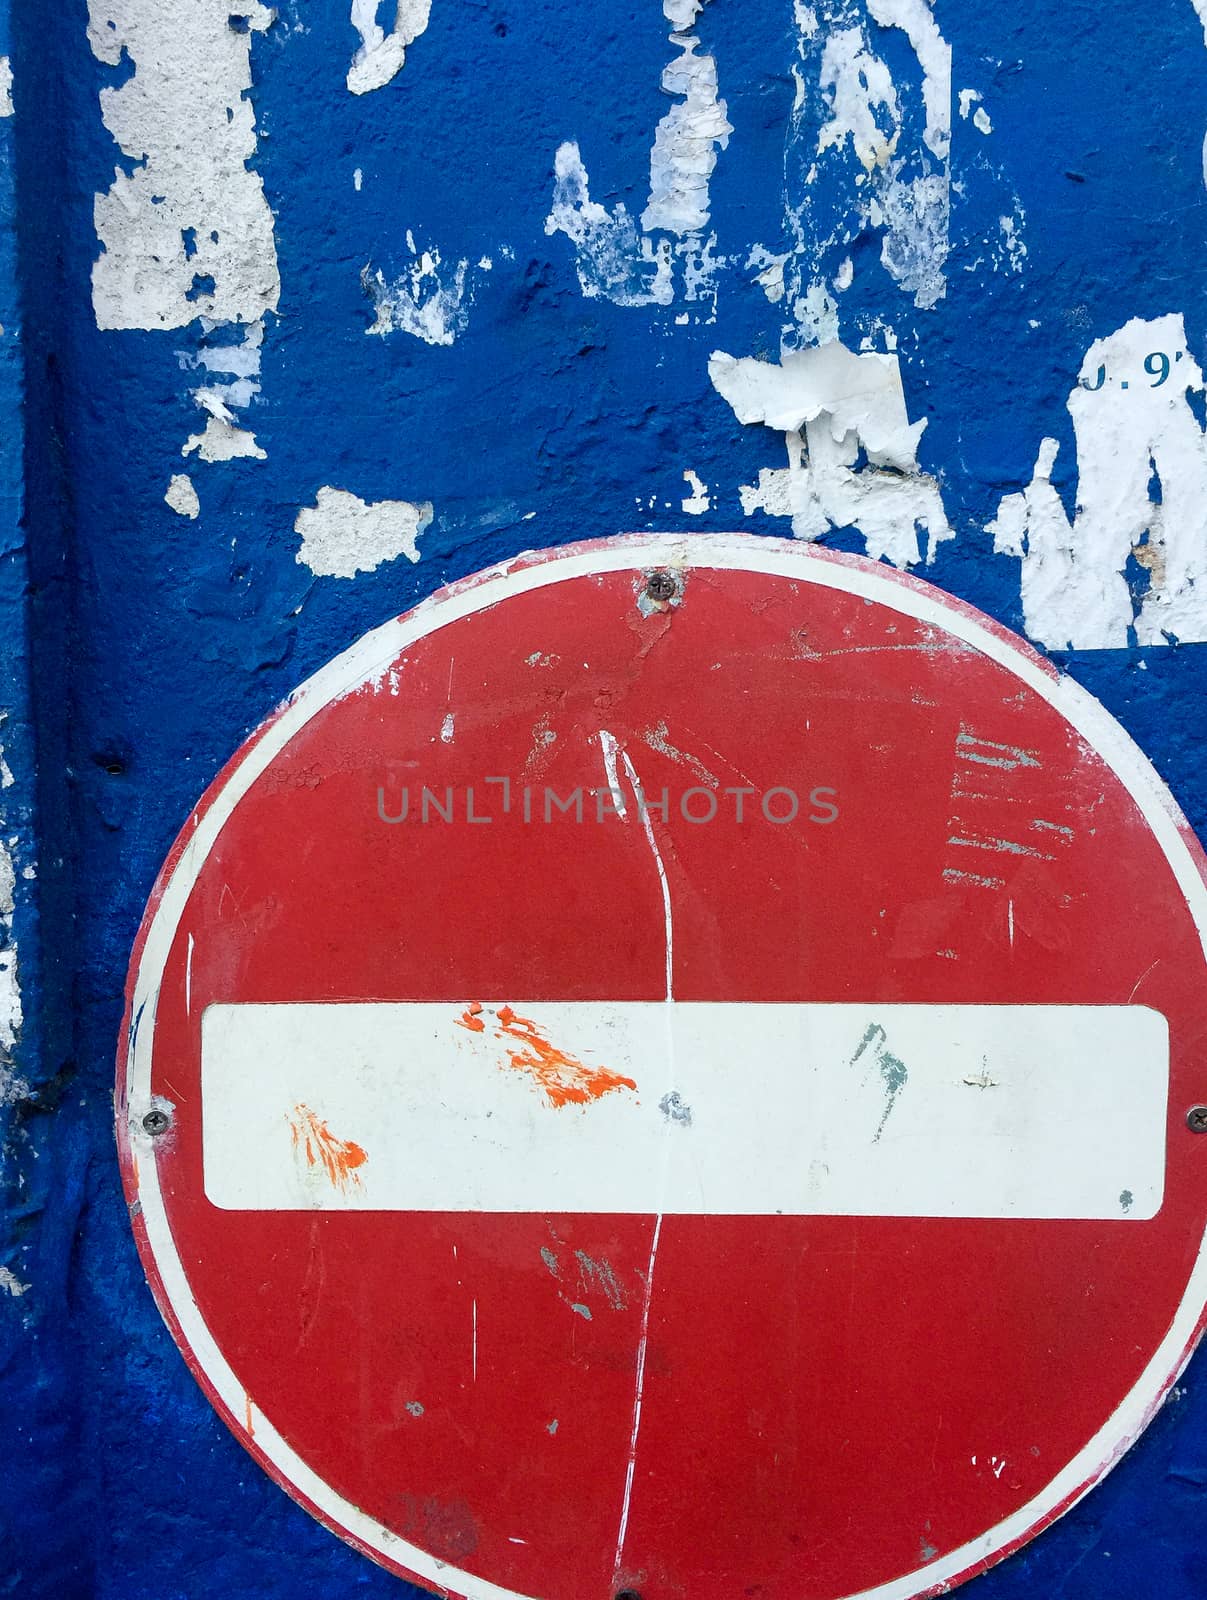 No entry sign on blue background wall by jovannig